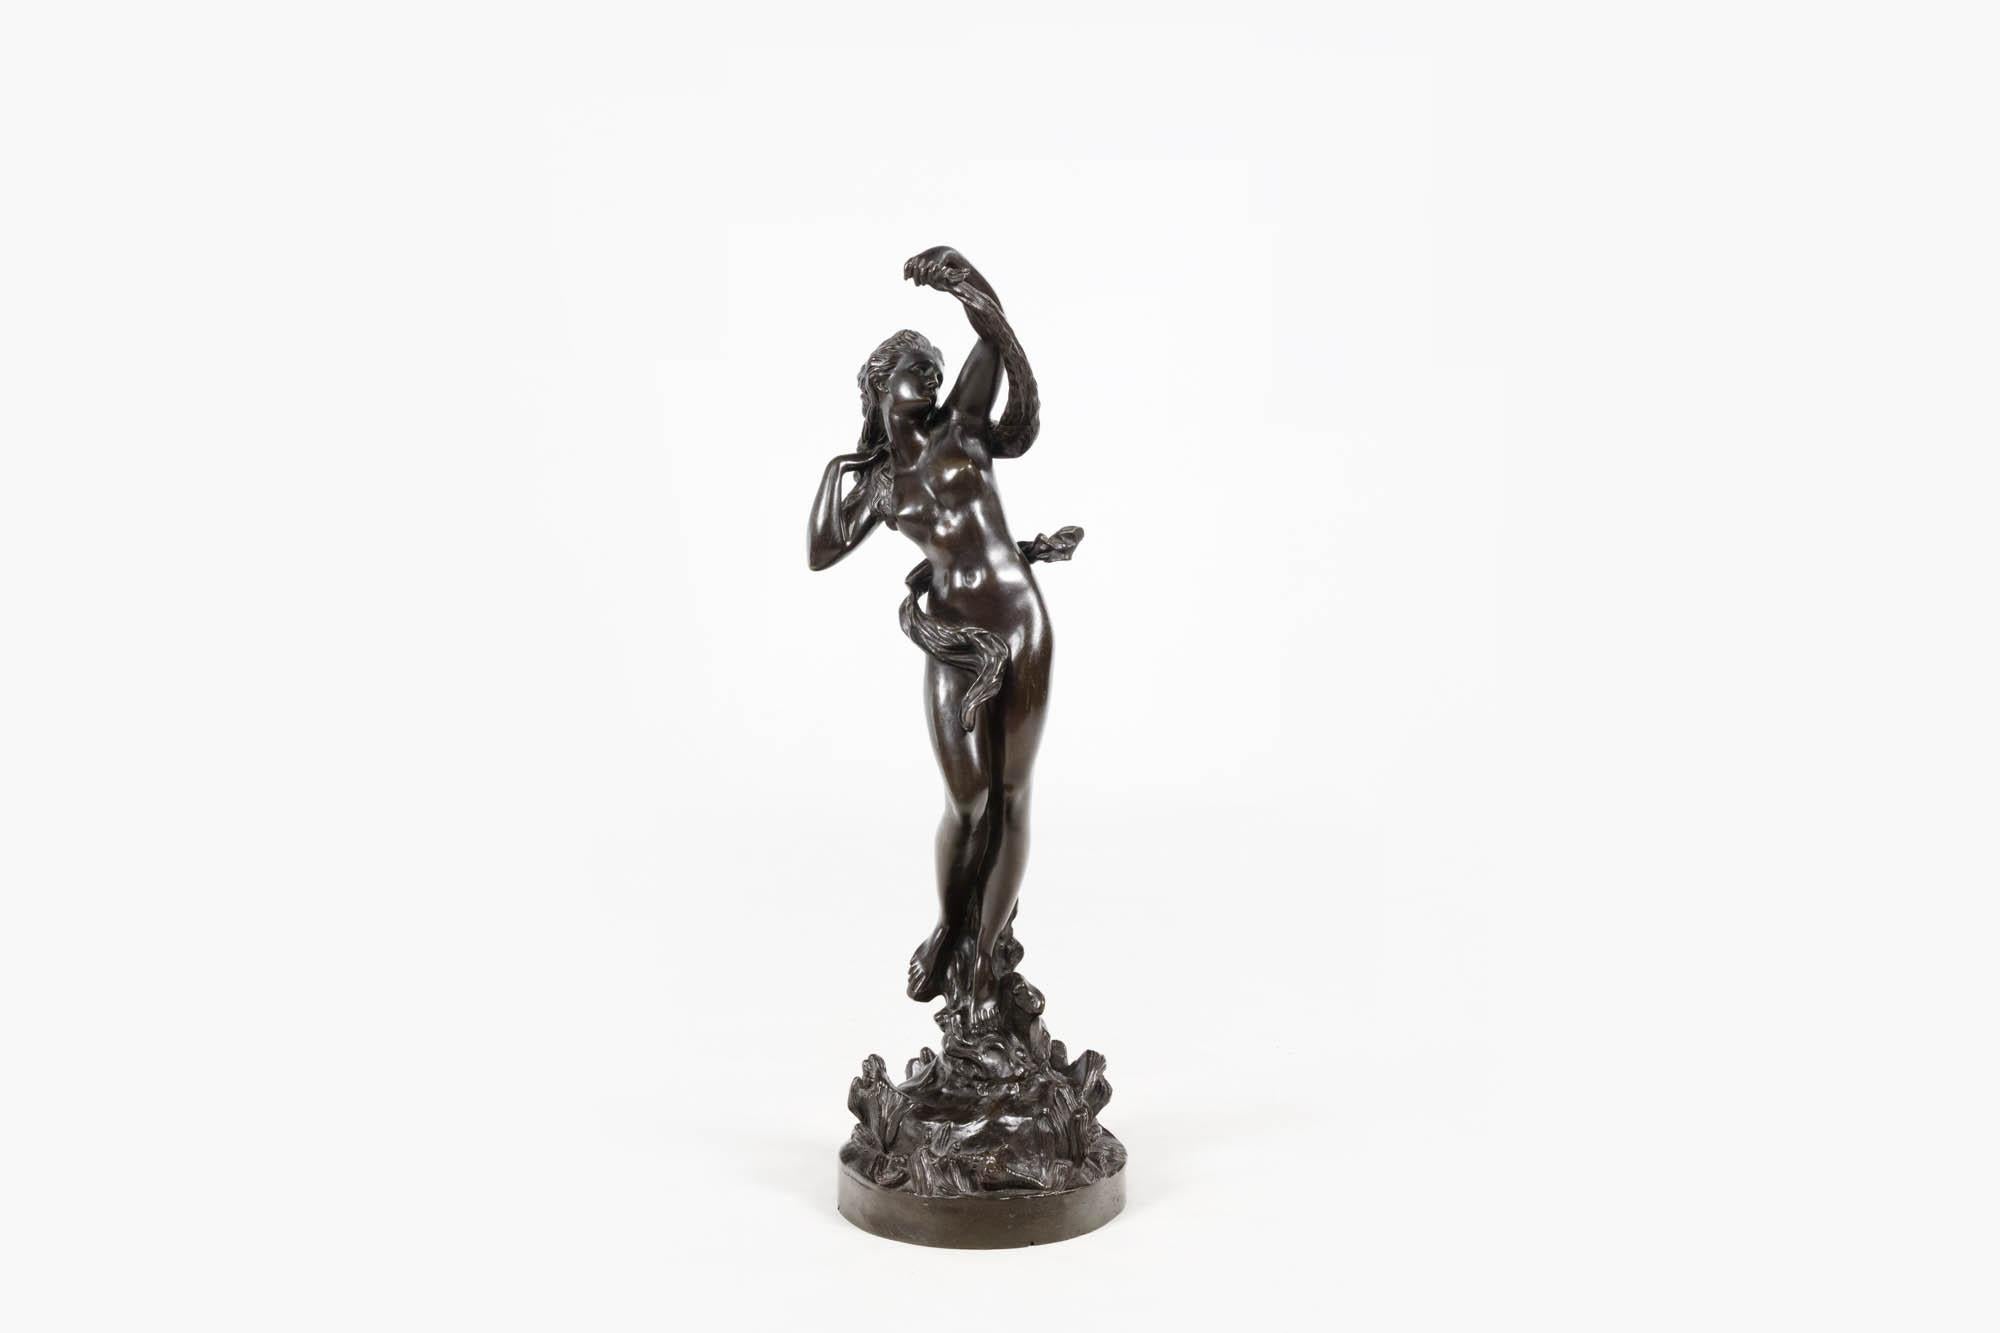 19th century patinated bronze sculpture of a dancing female figure, possibly a sea nymph. The figure stands on a base of seashells and repouses twirling a drape around her body. It beautifully captures the movement and delicacy of the model. Stamped